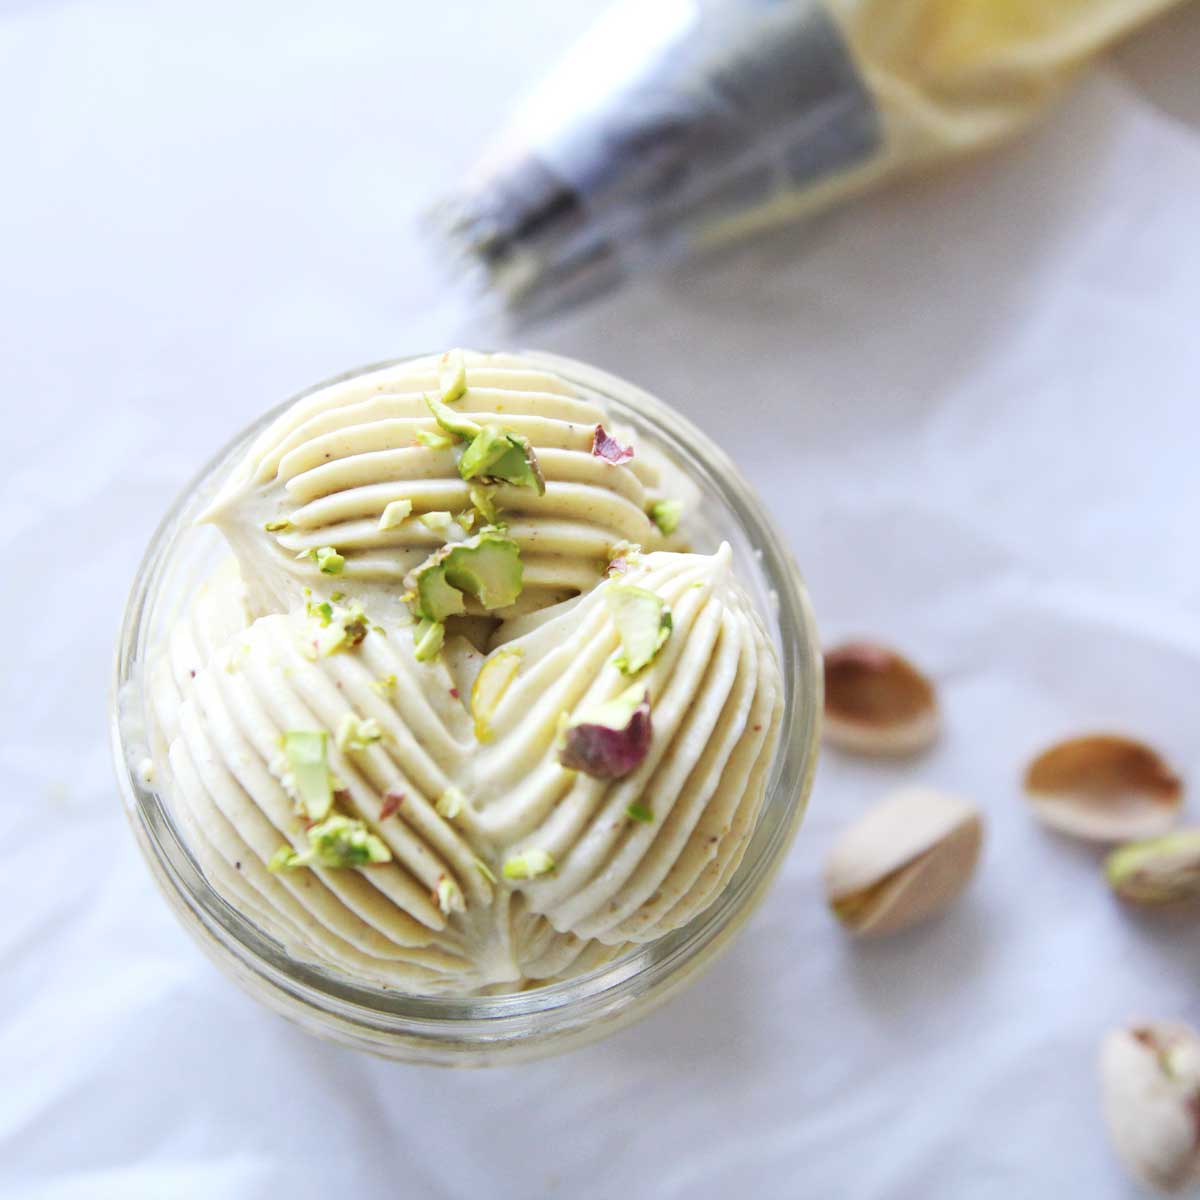 Homemade Pistachio Honey Whipped Cream Recipe that's Sure to Impress - Peppermint Whipped Cream